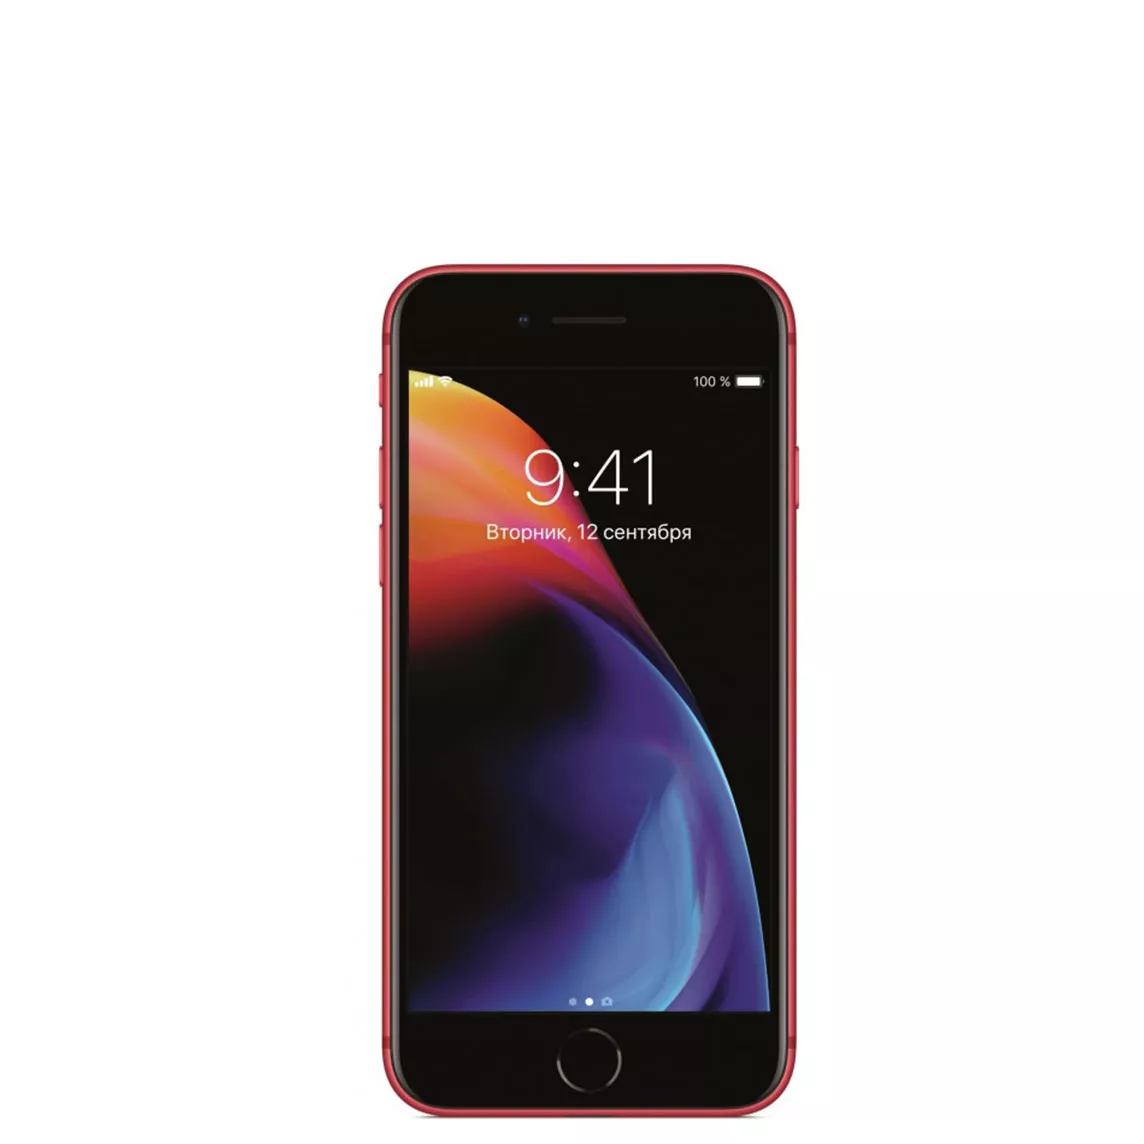 Apple iPhone 8 64ГБ (PRODUCT)RED Special Edition. Вид 1